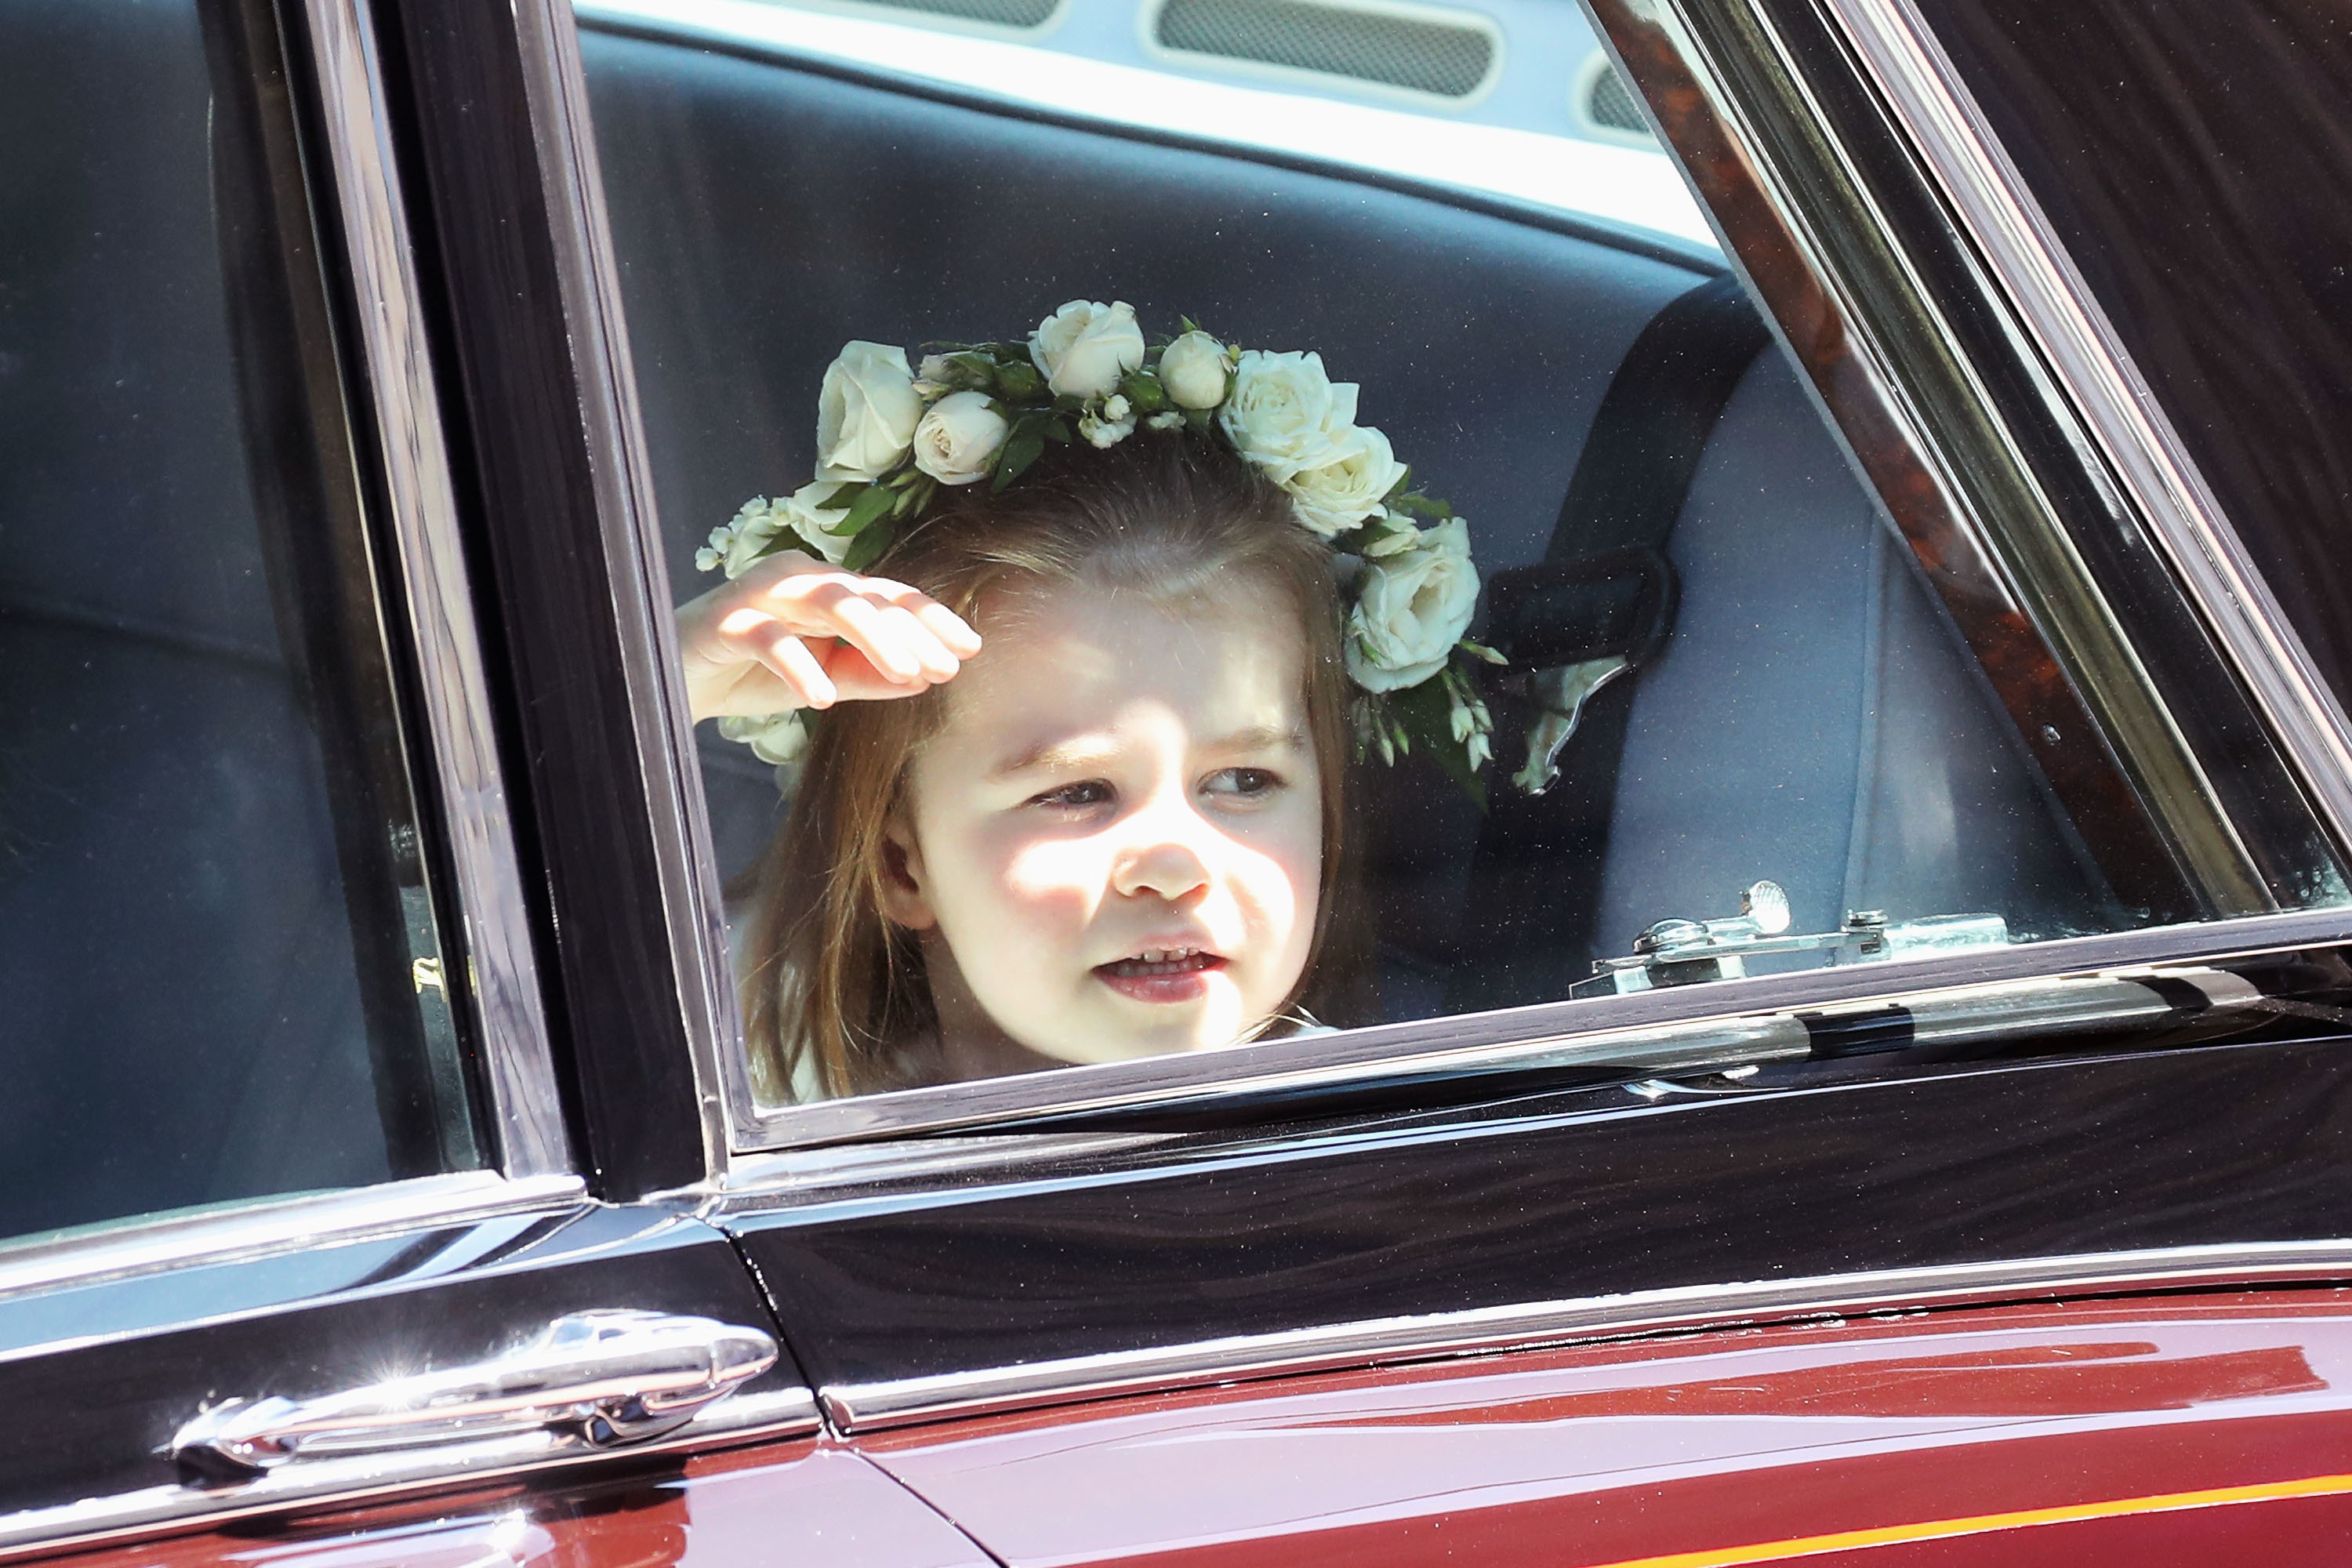 <p>Princess Charlotte of Cambridge arrived at uncle <a href="https://www.wonderwall.com/celebrity/profiles/overview/prince-harry-481.article">Prince Harry</a> and Meghan Markle's <a href="https://www.wonderwall.com/celebrity/photos/prince-harry-meghan-markle-married-royal-wedding-england-all-best-photos-3014346.gallery">wedding</a> -- she was a <a href="https://www.wonderwall.com/celebrity/photos/prince-harry-meghan-markle-married-royal-wedding-fun-facts-details-icymi-3014350.gallery?photoId=1028306">bridesmaid</a>! -- at St. George's Chapel at Windsor Castle on May 19, 2018.</p>